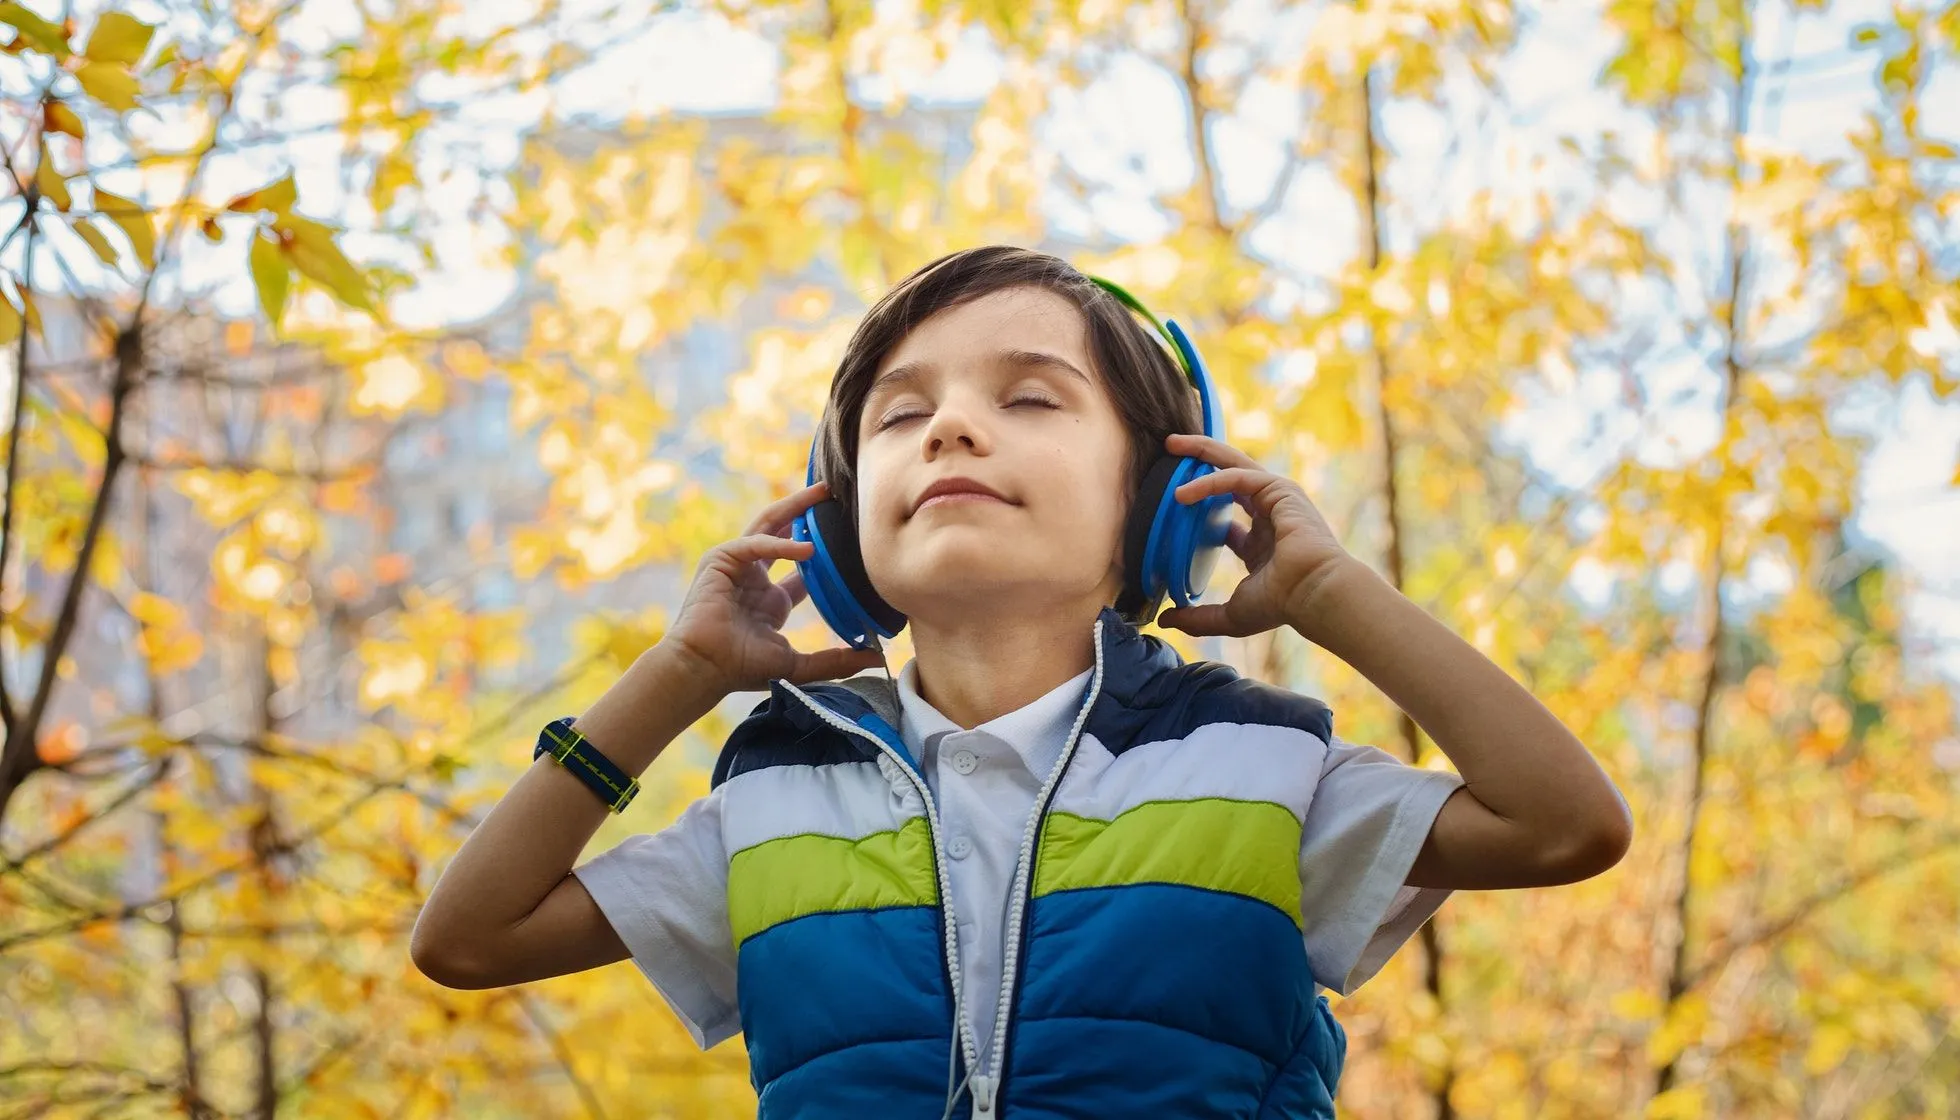 A young boy listens to music in the park.